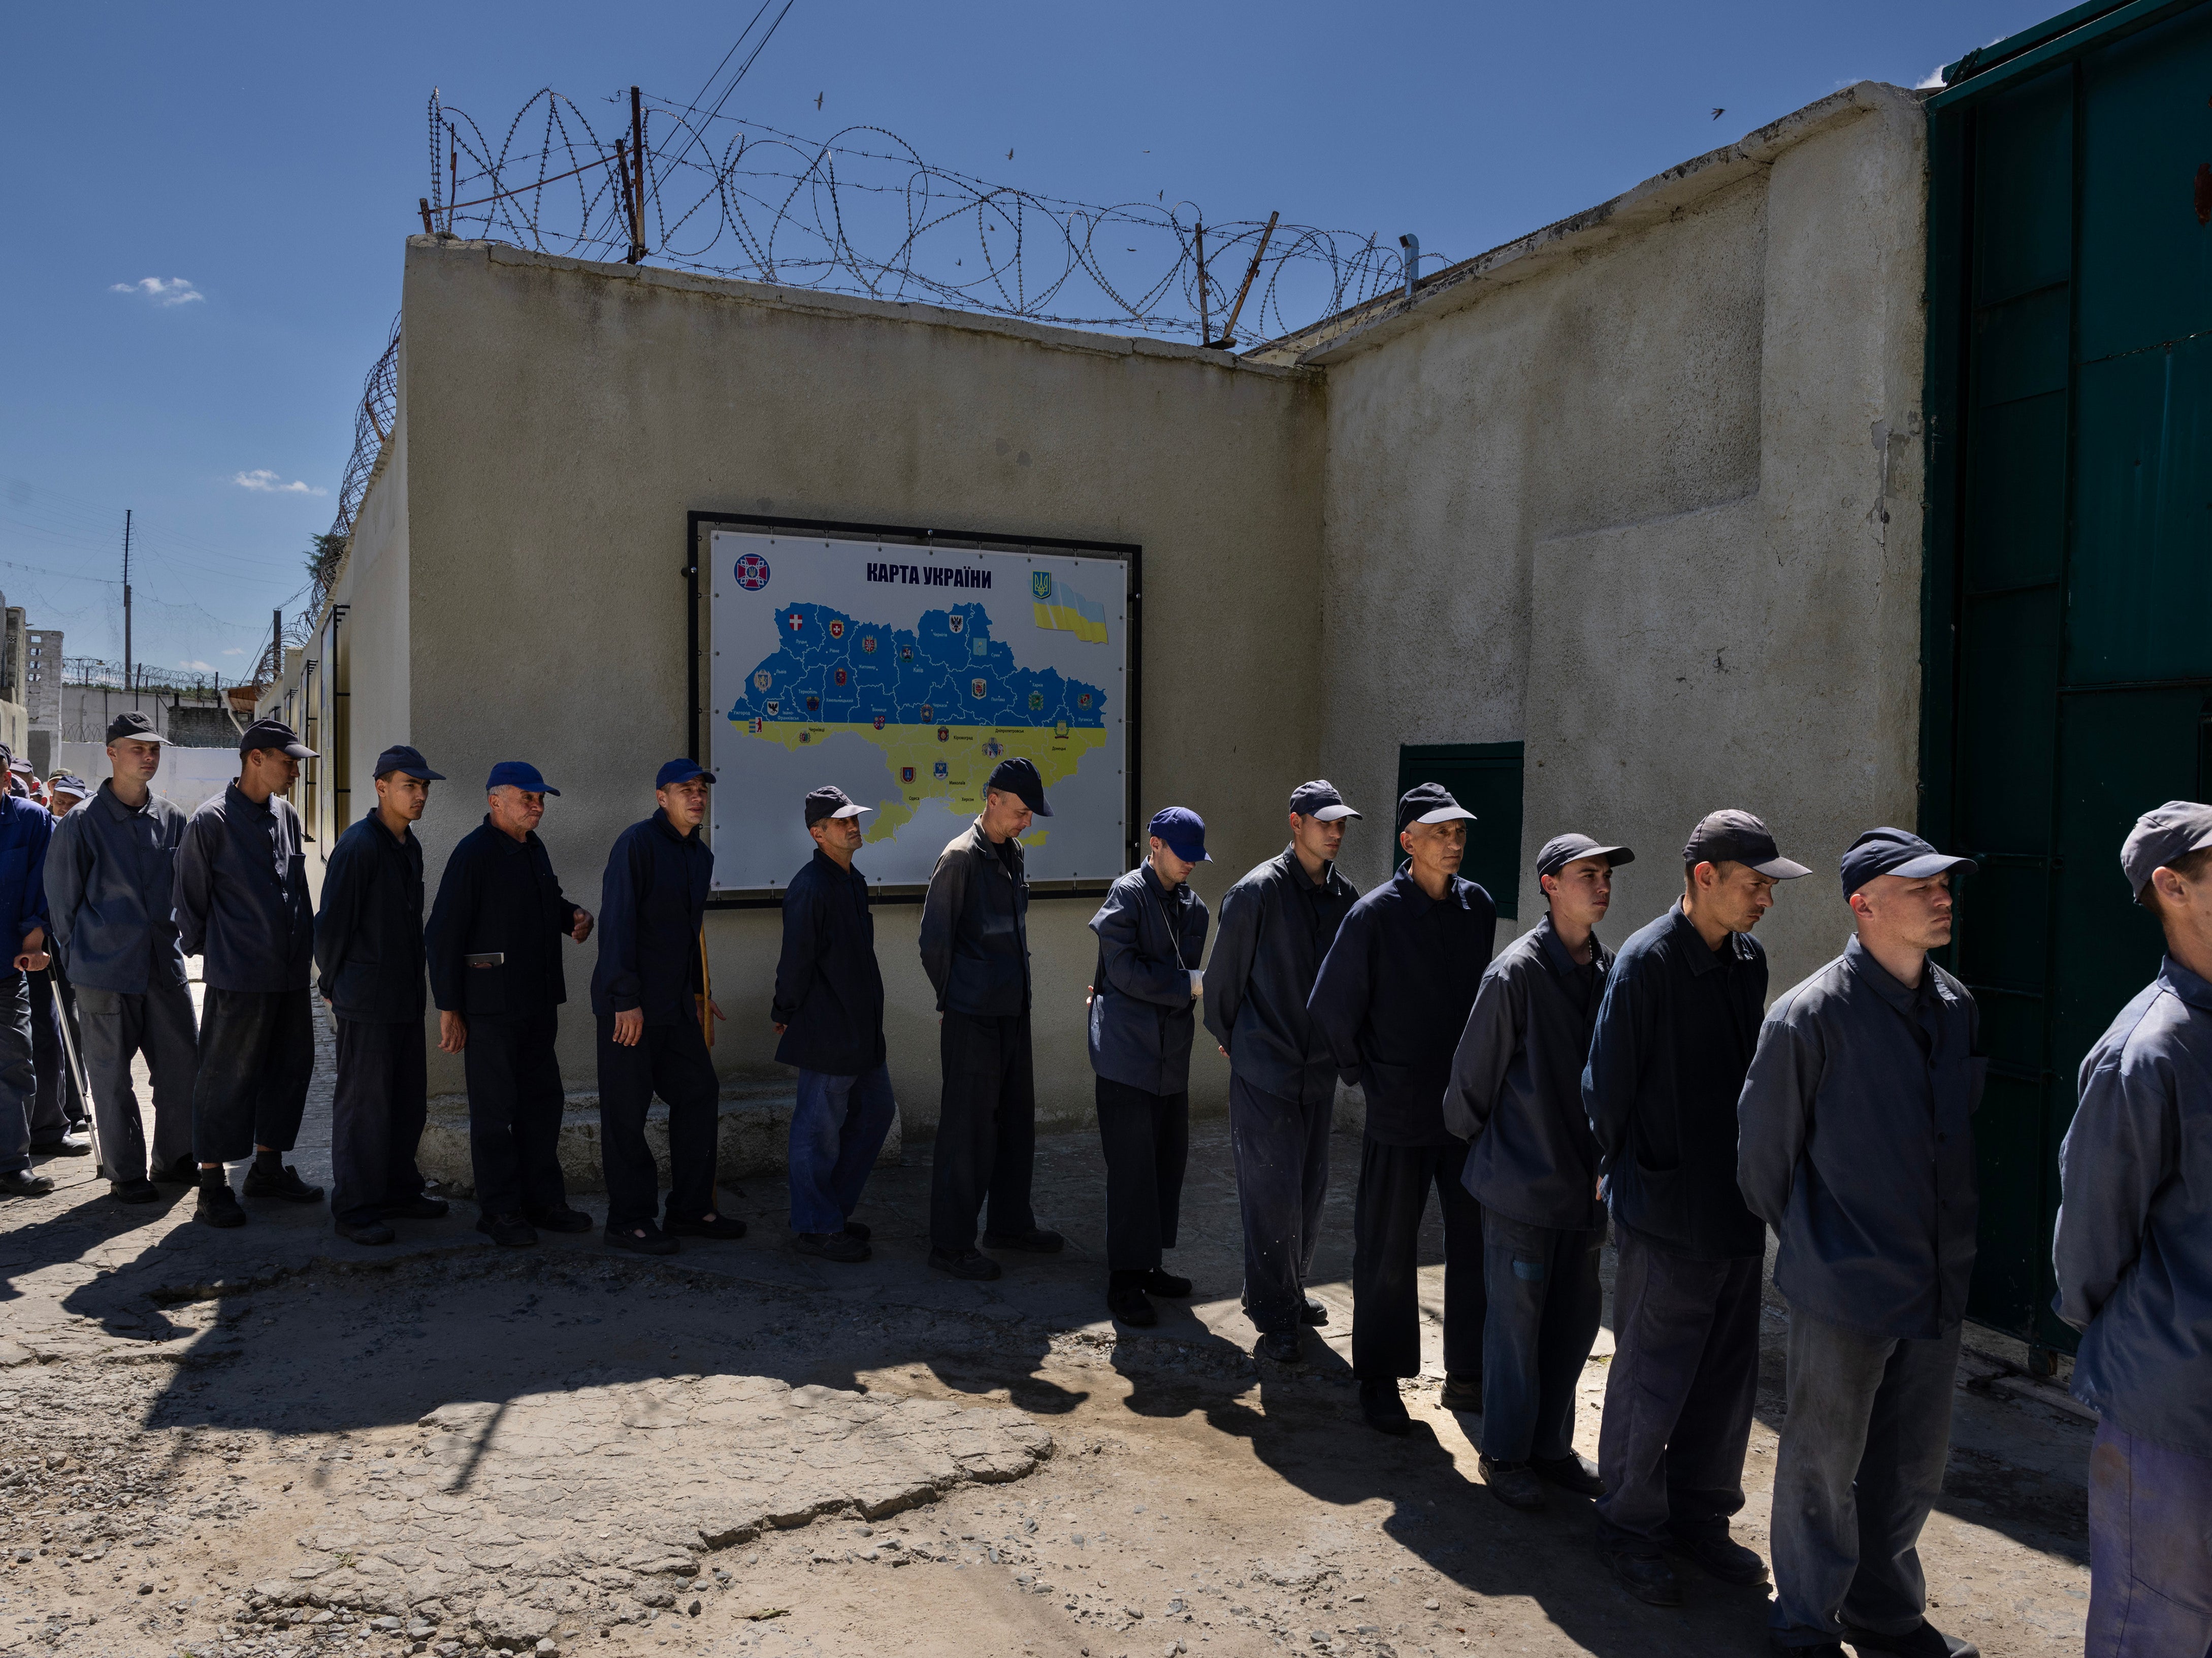 Russian prisoners of war line up at a camp in Lyiv, Ukraine